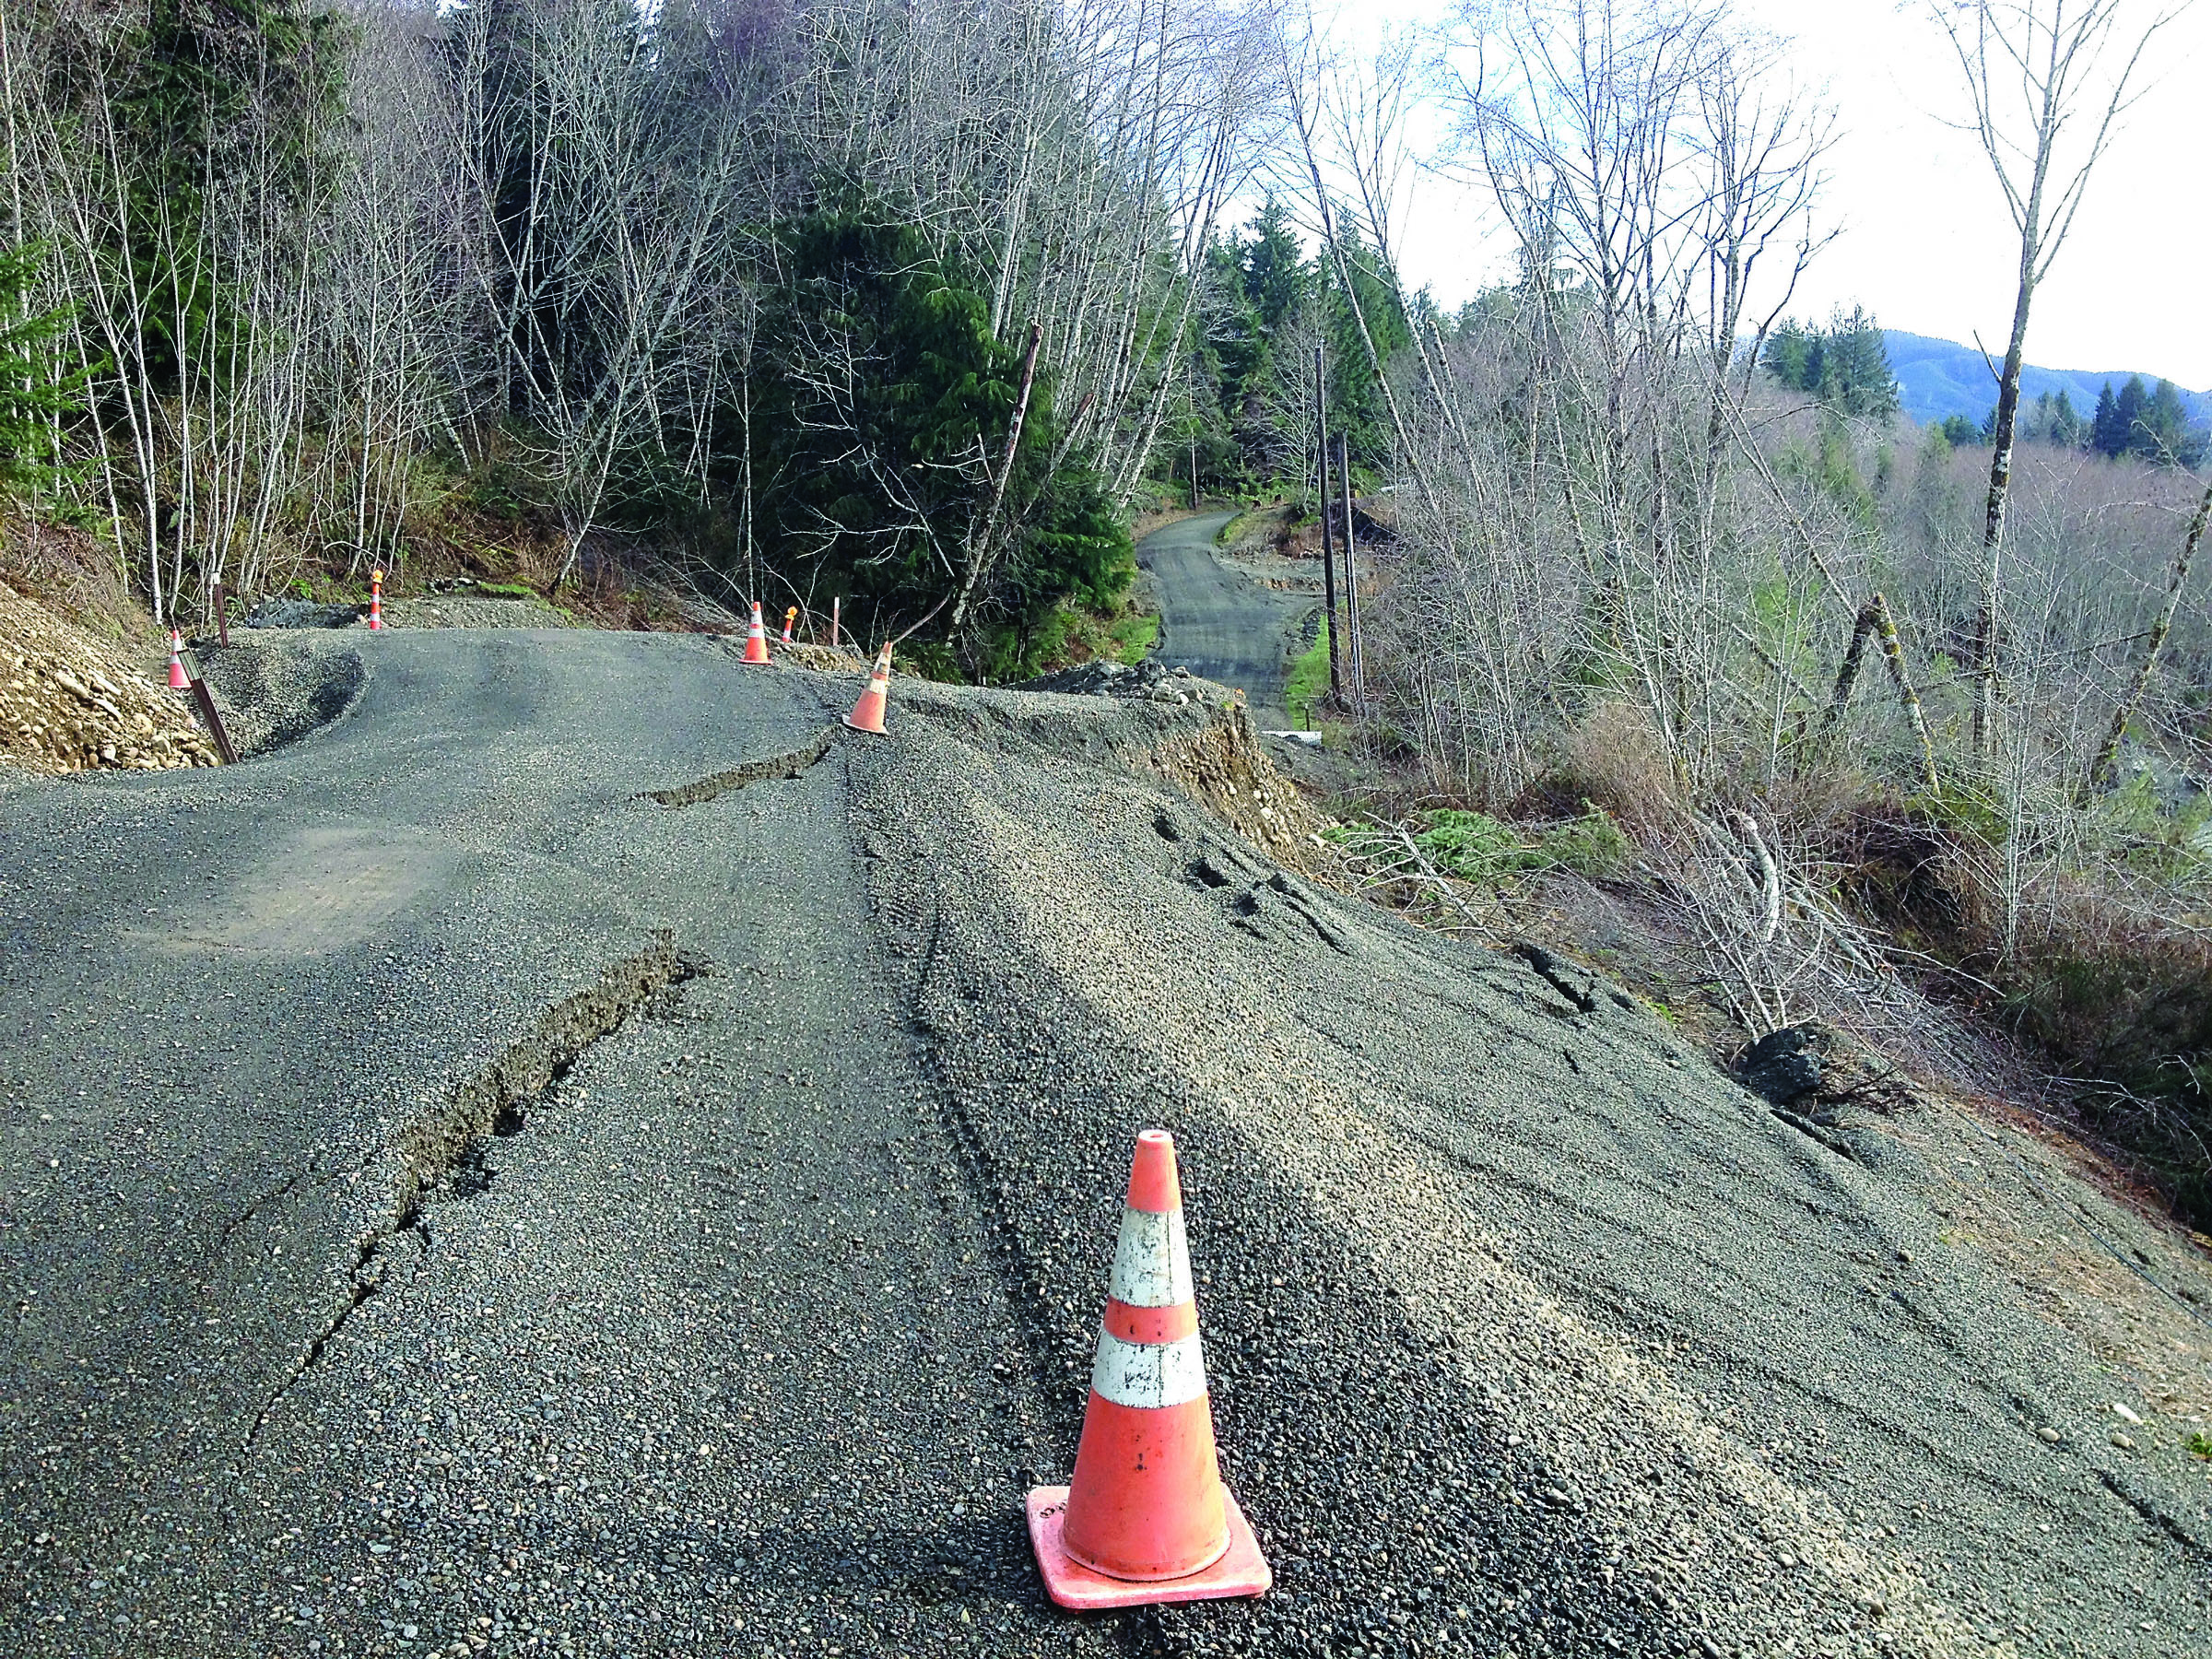 Jefferson County officials are considering bids to replace a stretch of Undi Road that has been severely damaged. (Monte Reinders)